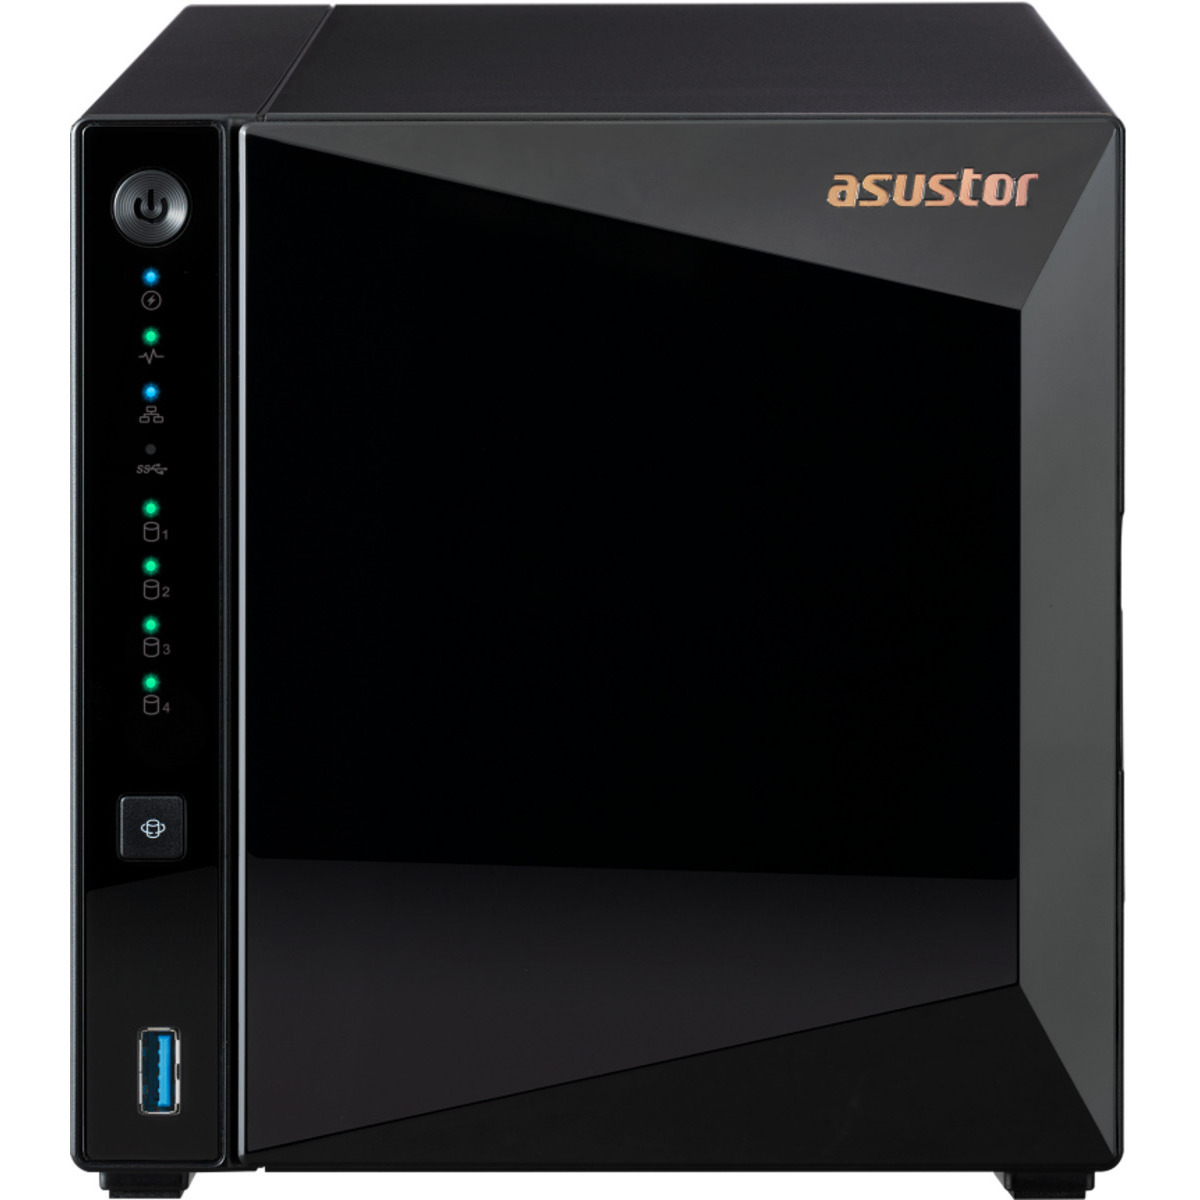 ASUSTOR DRIVESTOR 4 Pro Gen2 AS3304T v2 96tb 4-Bay Desktop Personal / Basic Home / Small Office NAS - Network Attached Storage Device 4x24tb Western Digital Red Pro WD240KFGX 3.5 7200rpm SATA 6Gb/s HDD NAS Class Drives Installed - Burn-In Tested - ON SALE DRIVESTOR 4 Pro Gen2 AS3304T v2